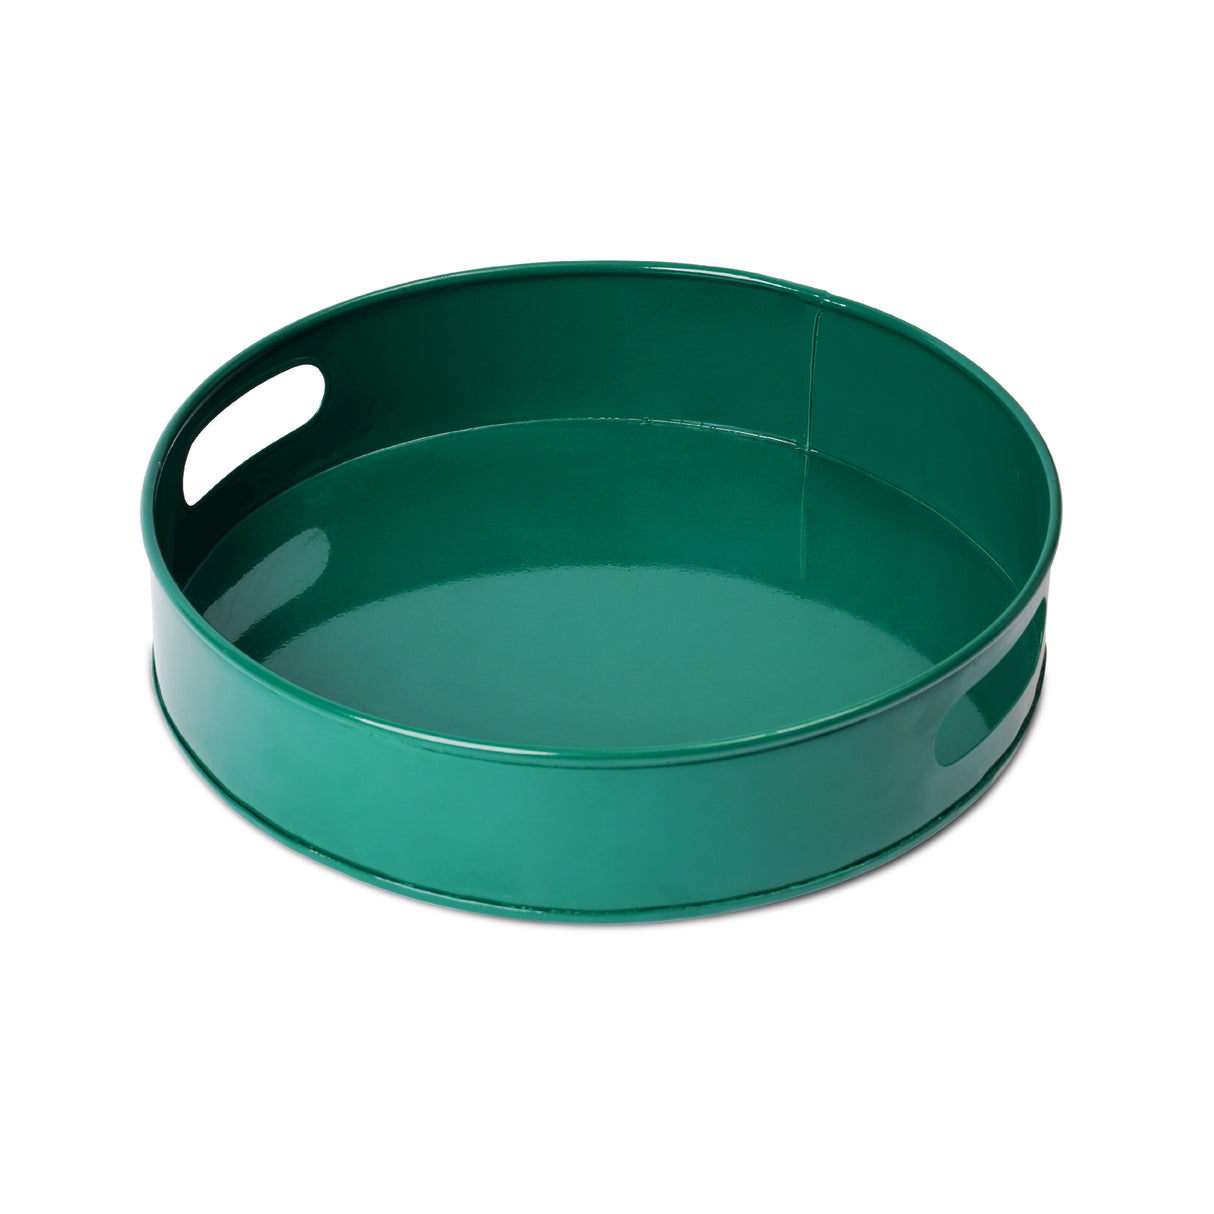 Green round metal serving tray 